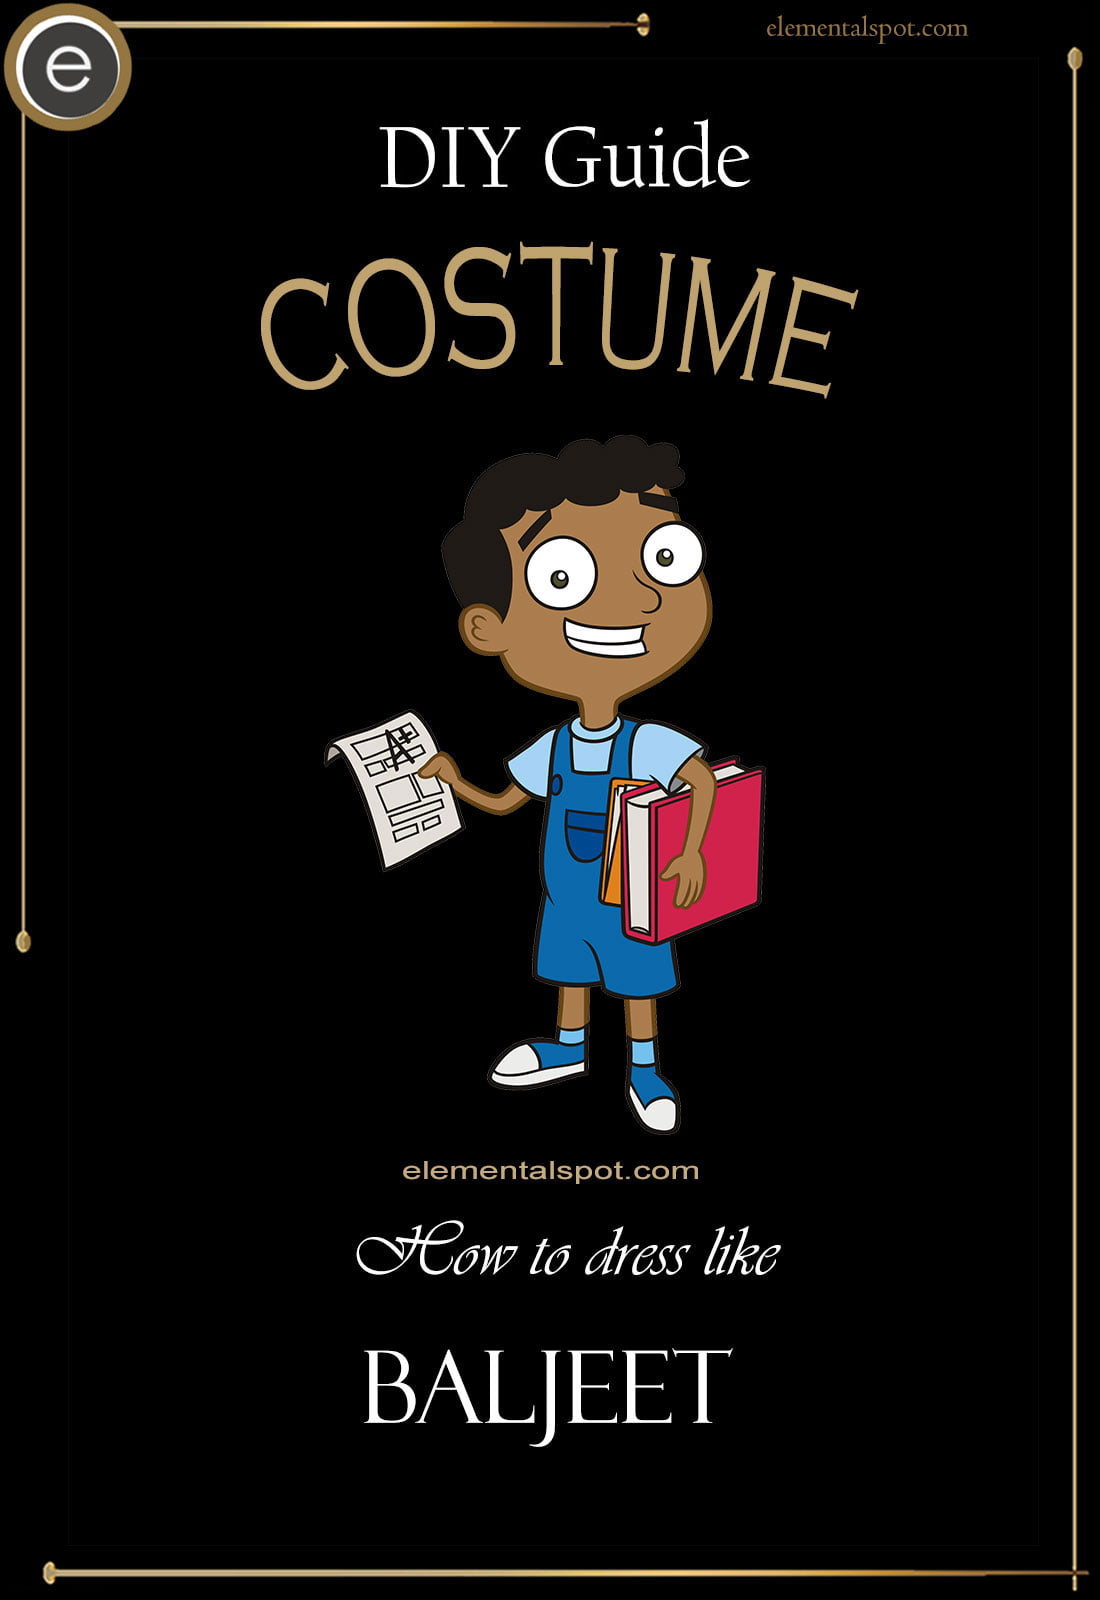 Dress Up Like Baljeet from Phineas and Ferb - Elemental Spot